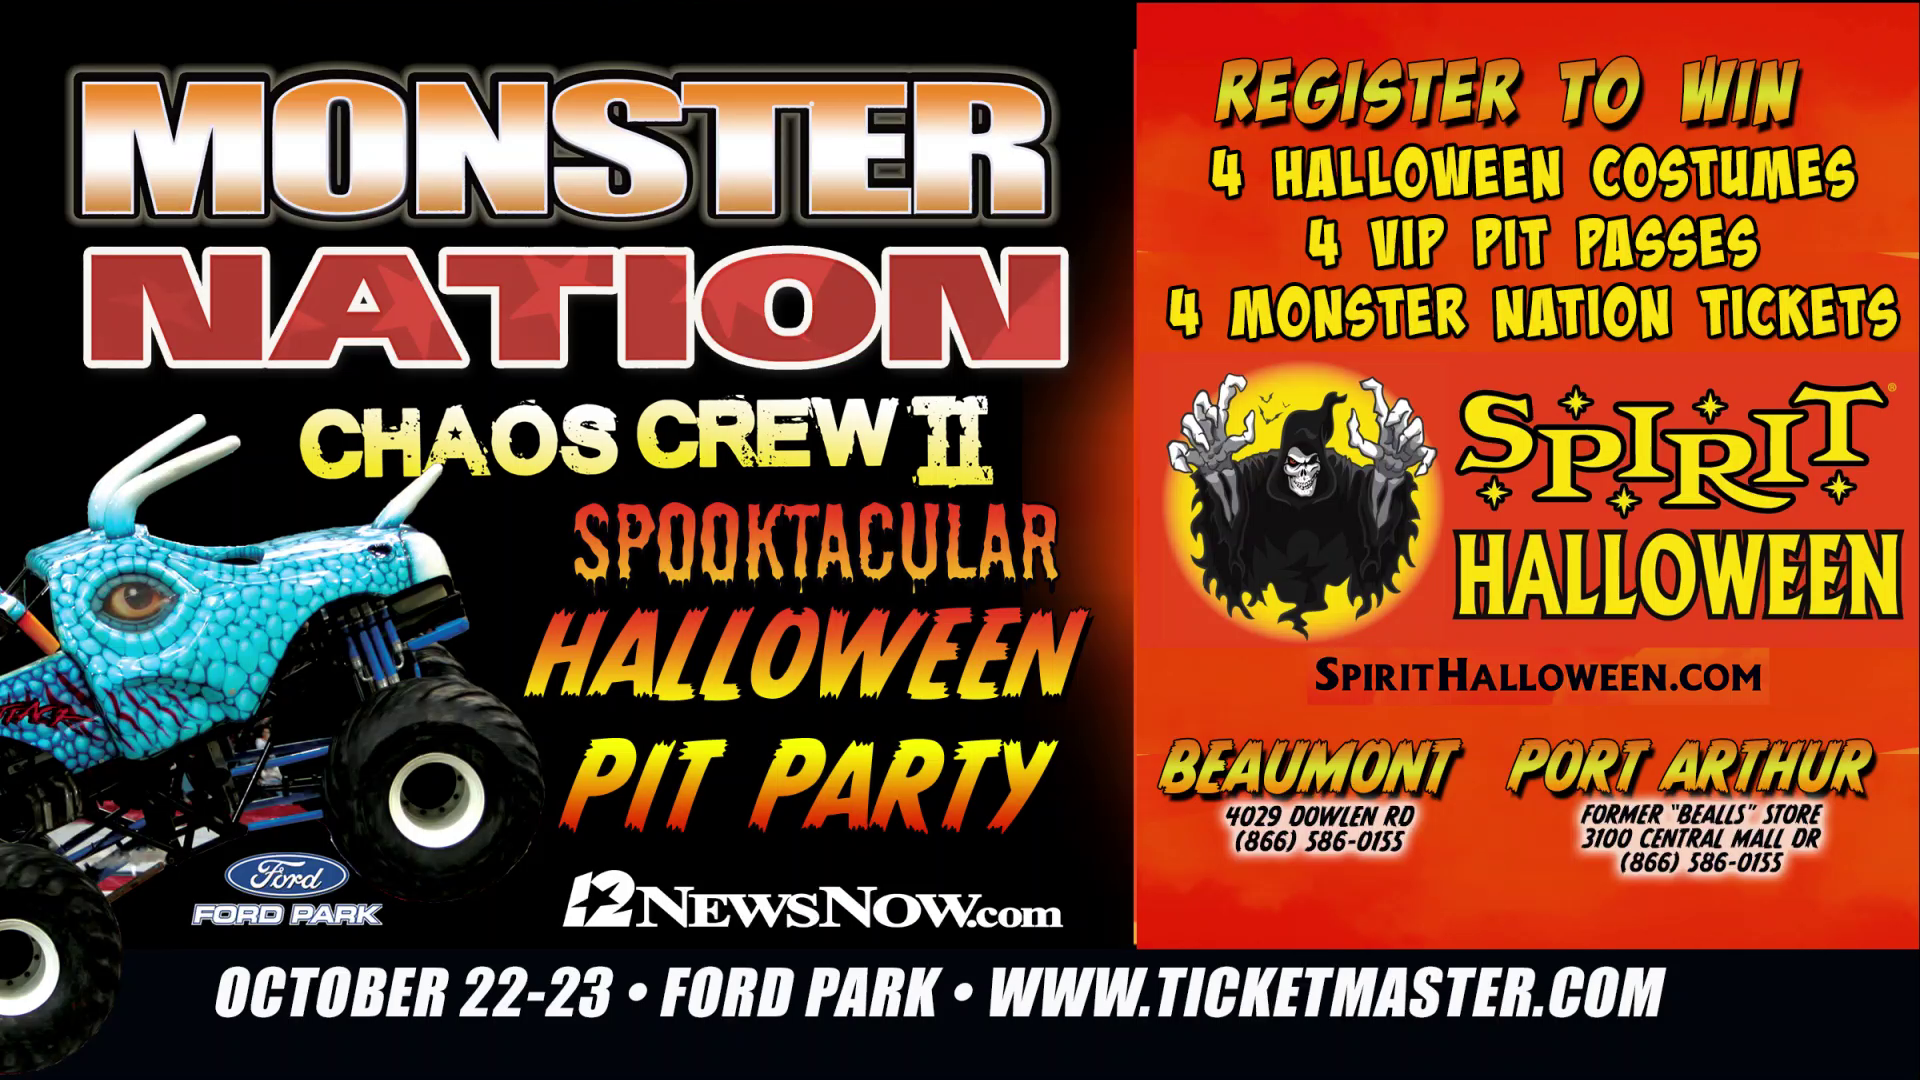 Register to win a set of  four Halloween costumes, VIP pit passes, Monster Nation tickets!